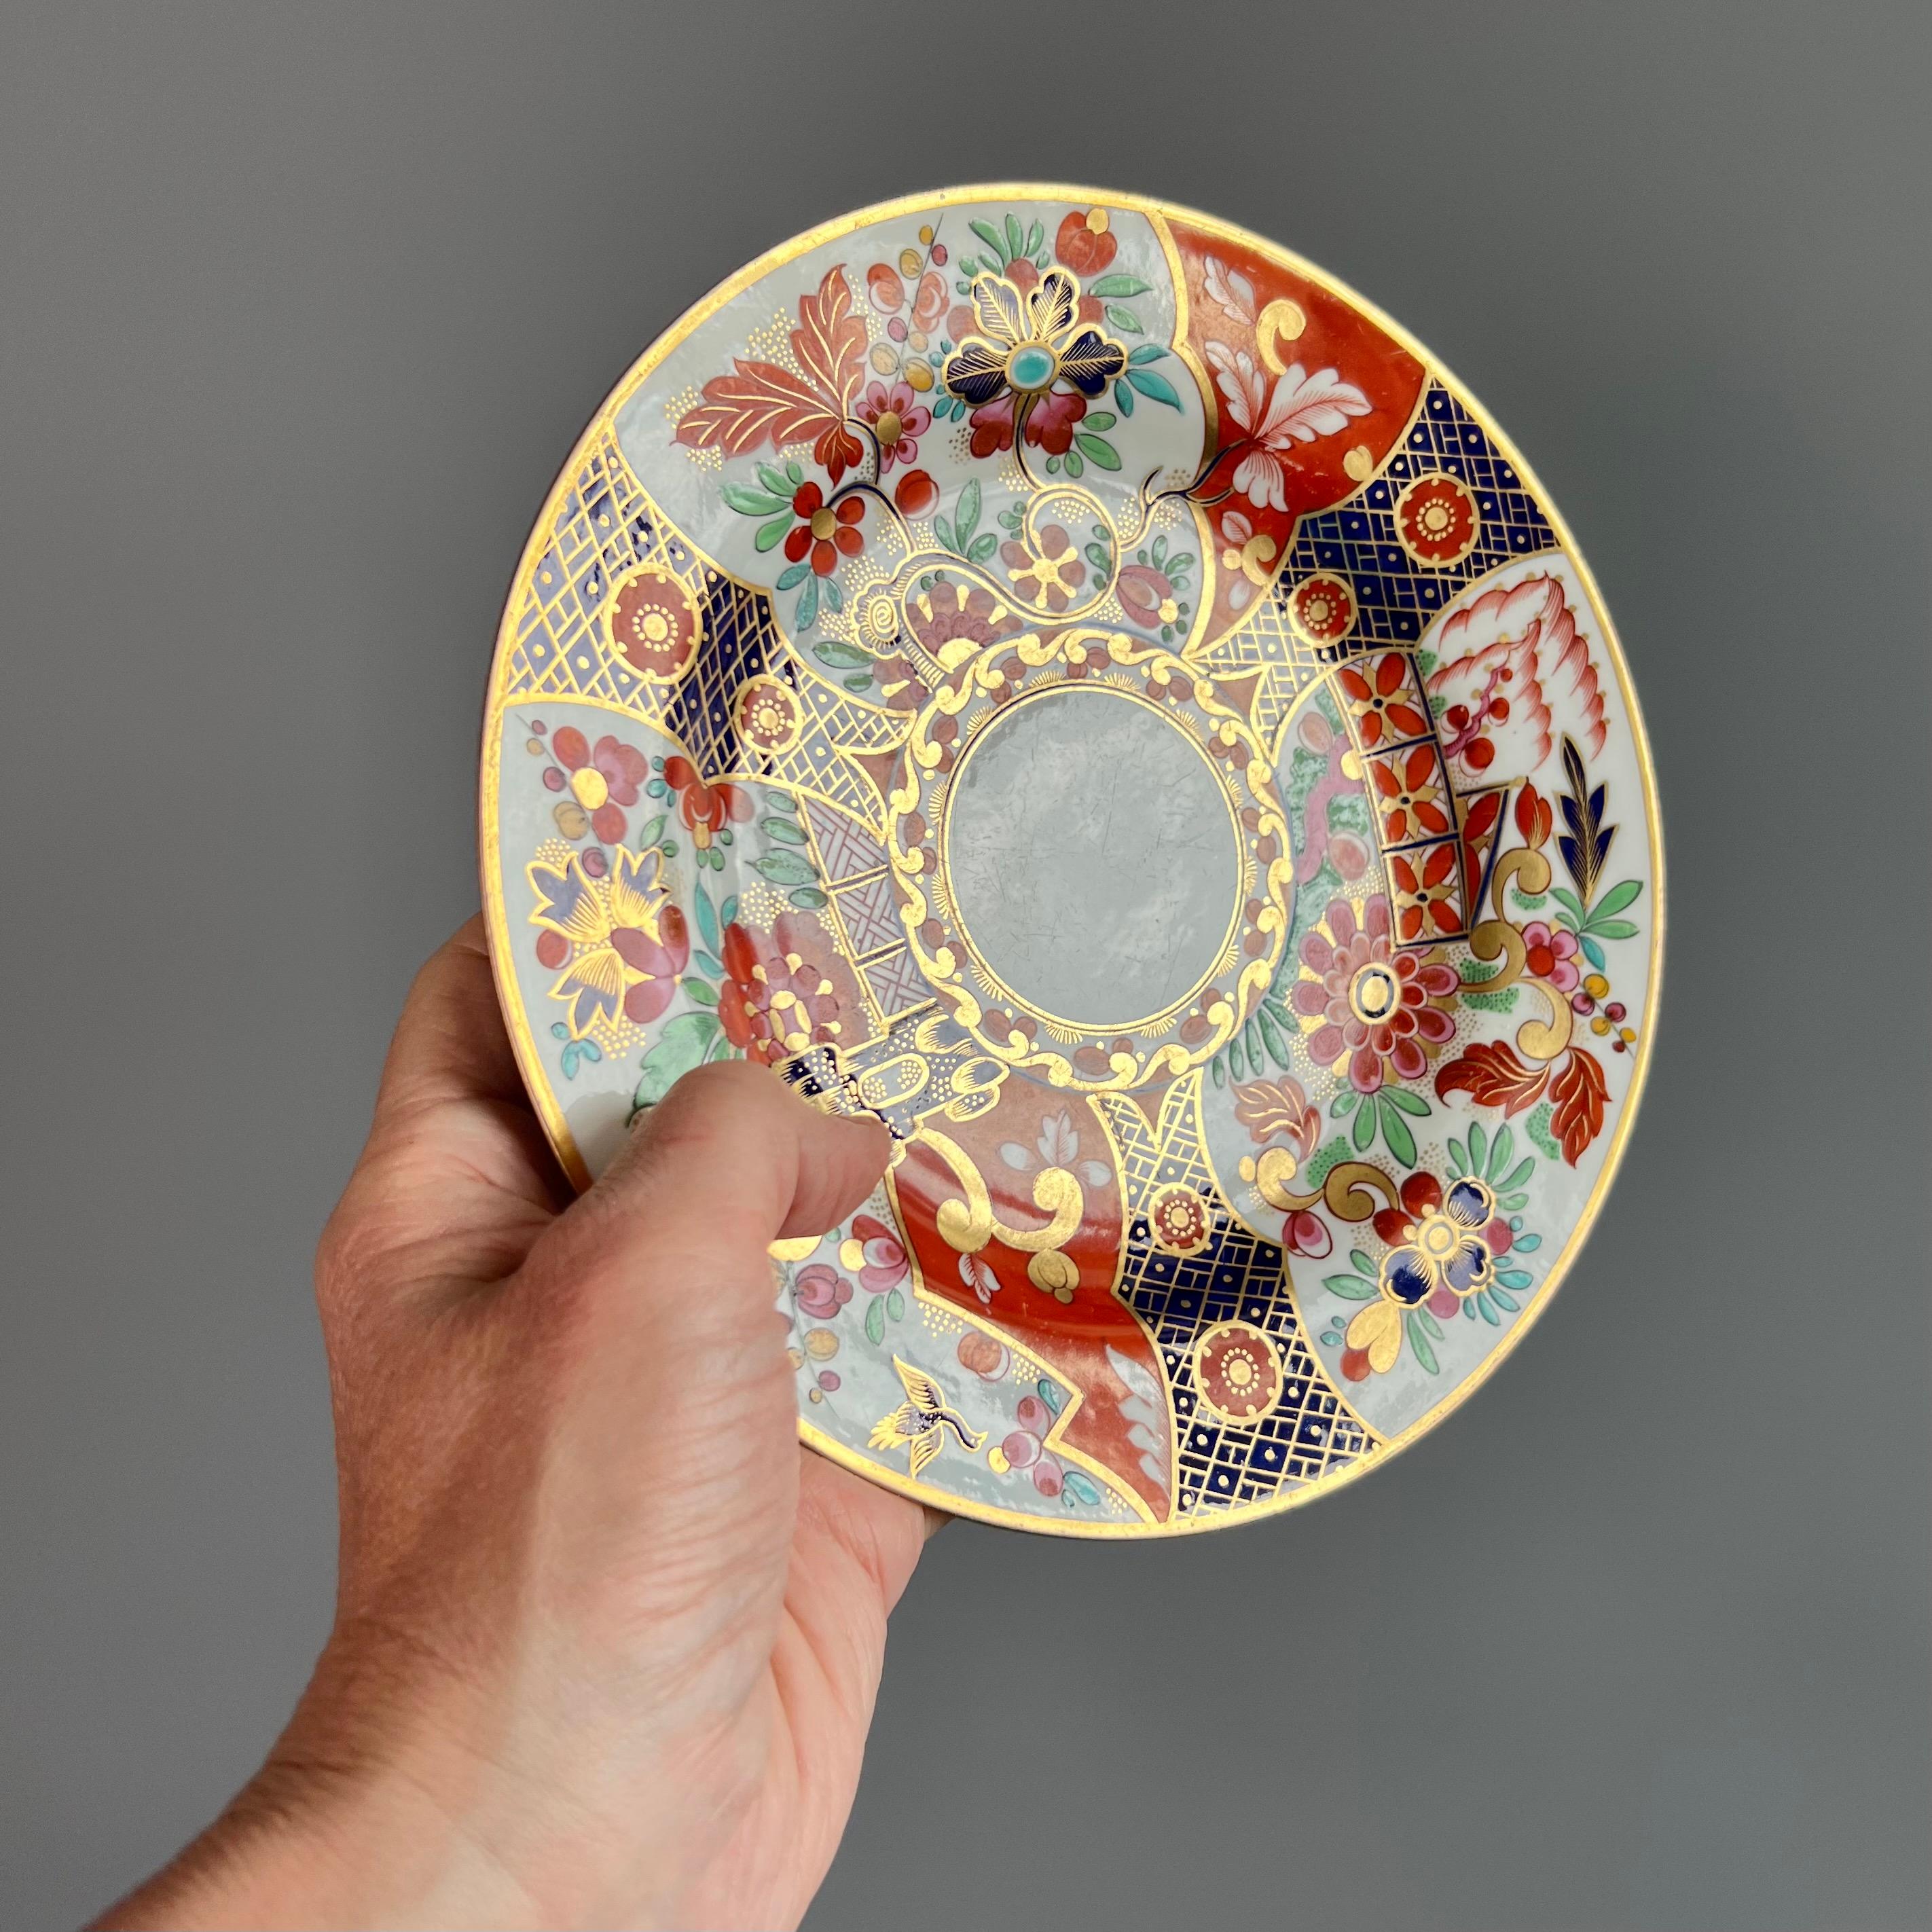 This is a stunning dessert plate made by Flight Barr & Barr around the year 1815. It is decorated with what is often called the 